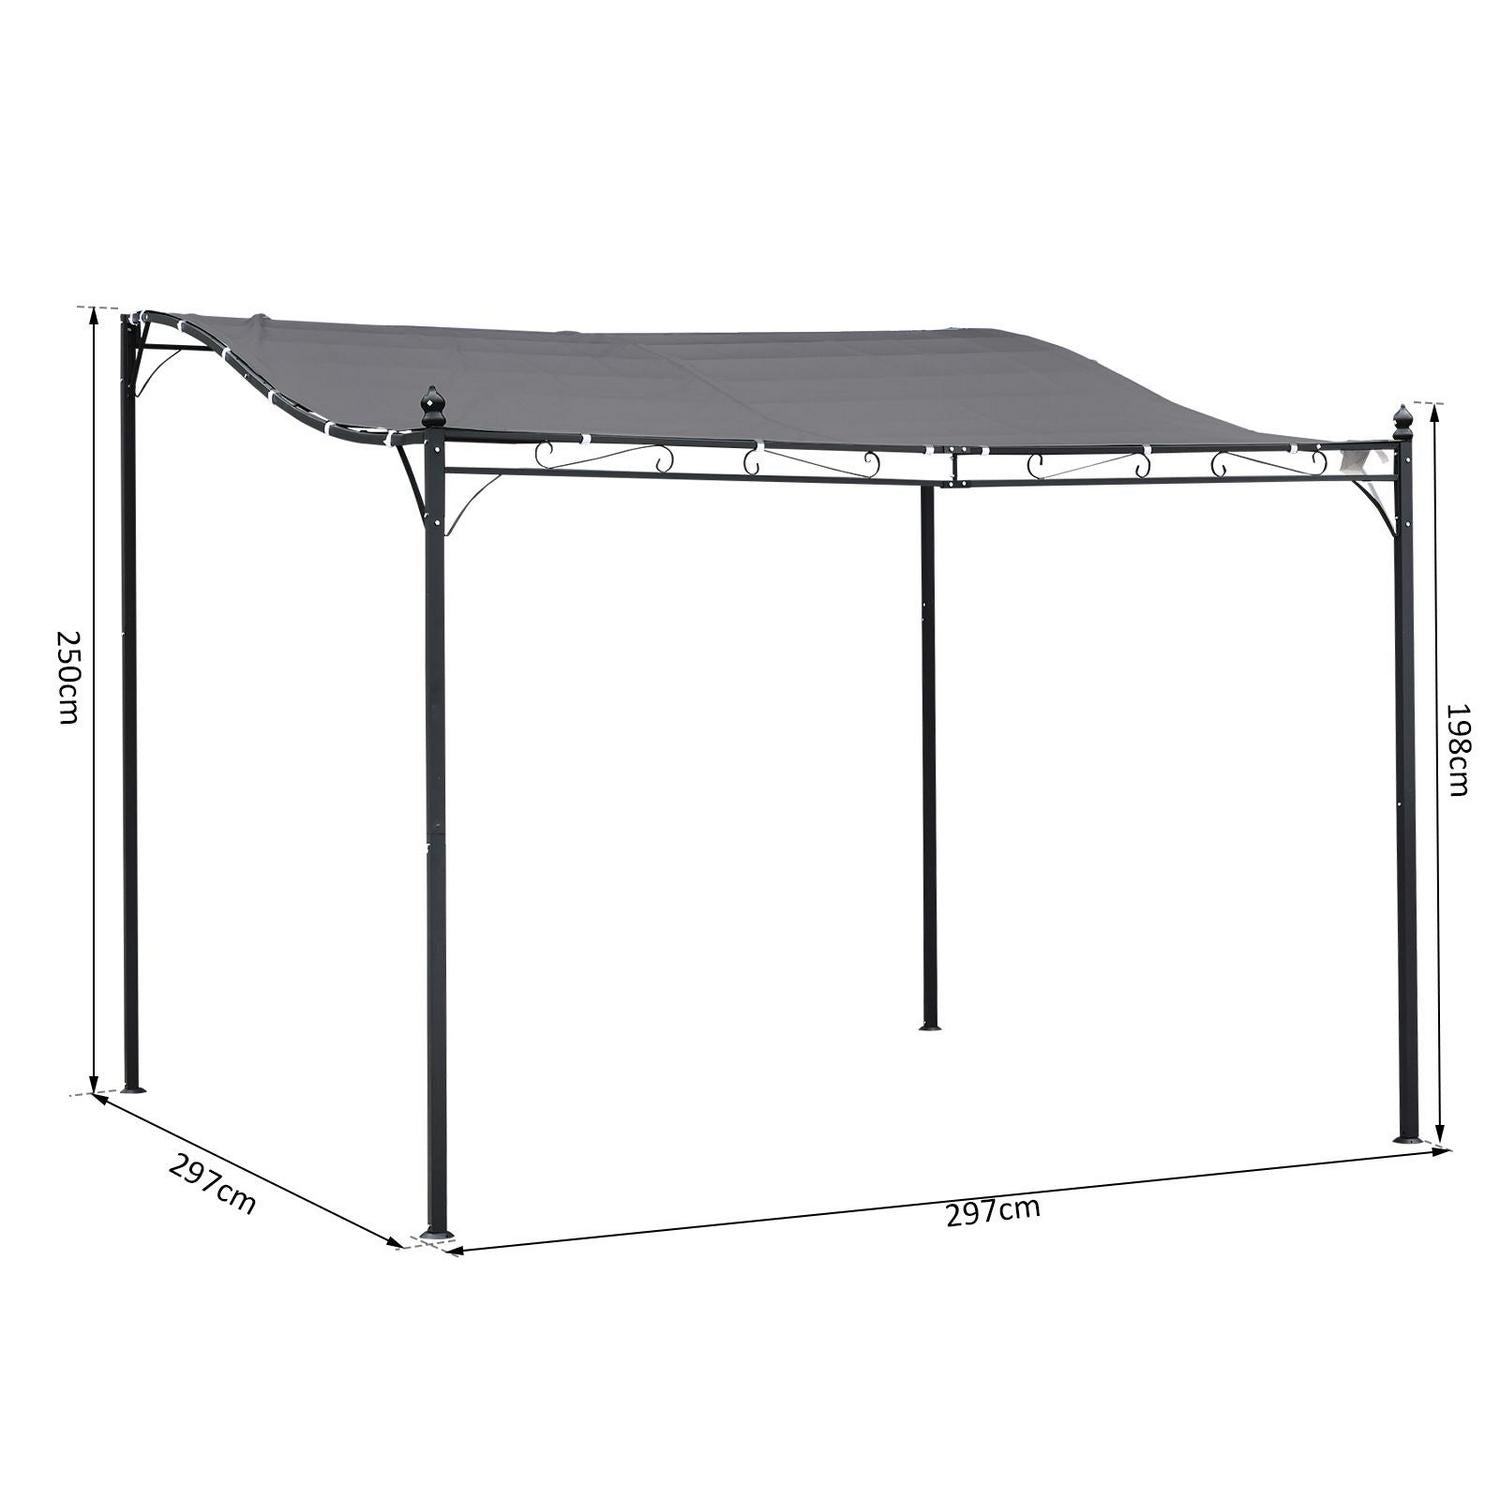 3x3m Freestanding Metal Wall Awning Canopy Grey